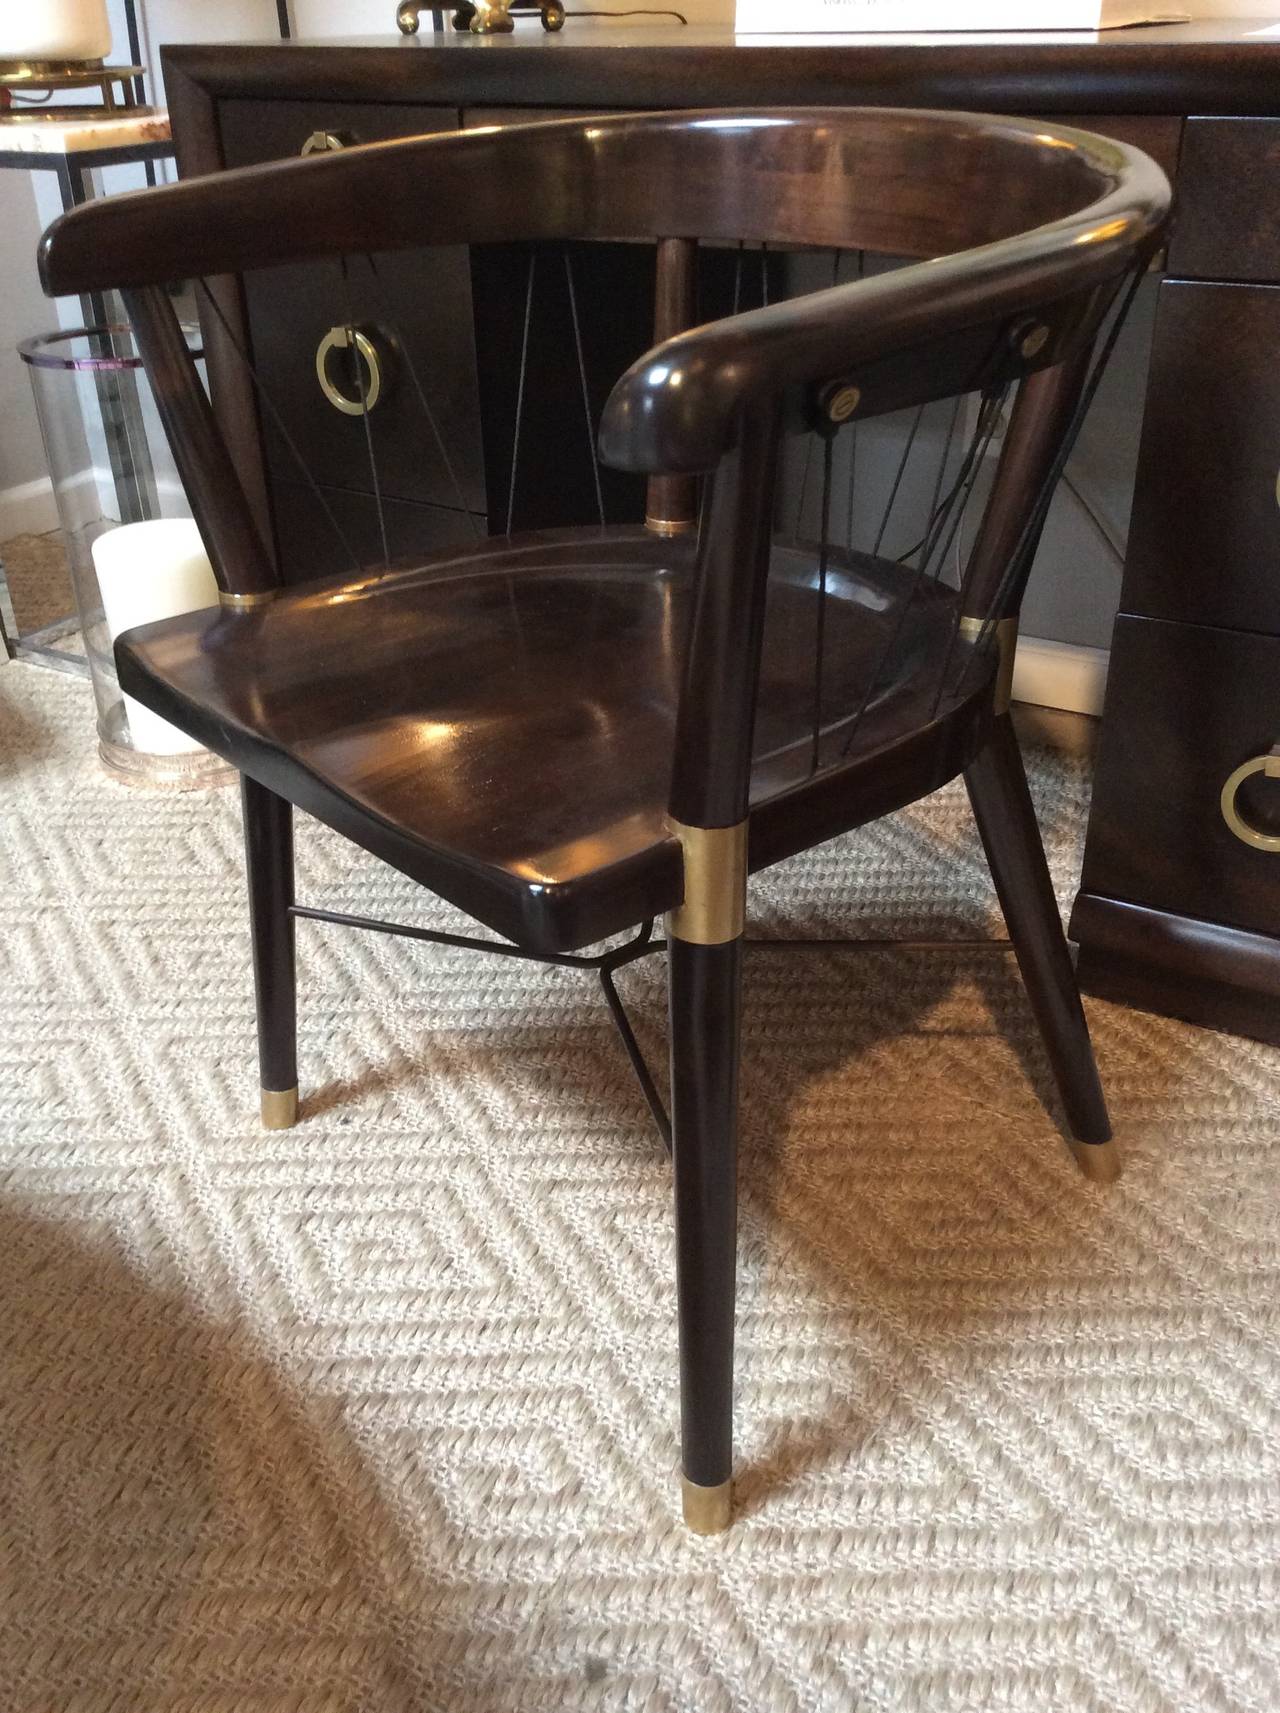 Extremely rare captain's style chair by Edward Wormley. Adorned with stunning brass screw mountings securing cord strung around the horseshoe shaped back. Brass capped feet and brass detailing where seat attaches to legs. Chair has been completely